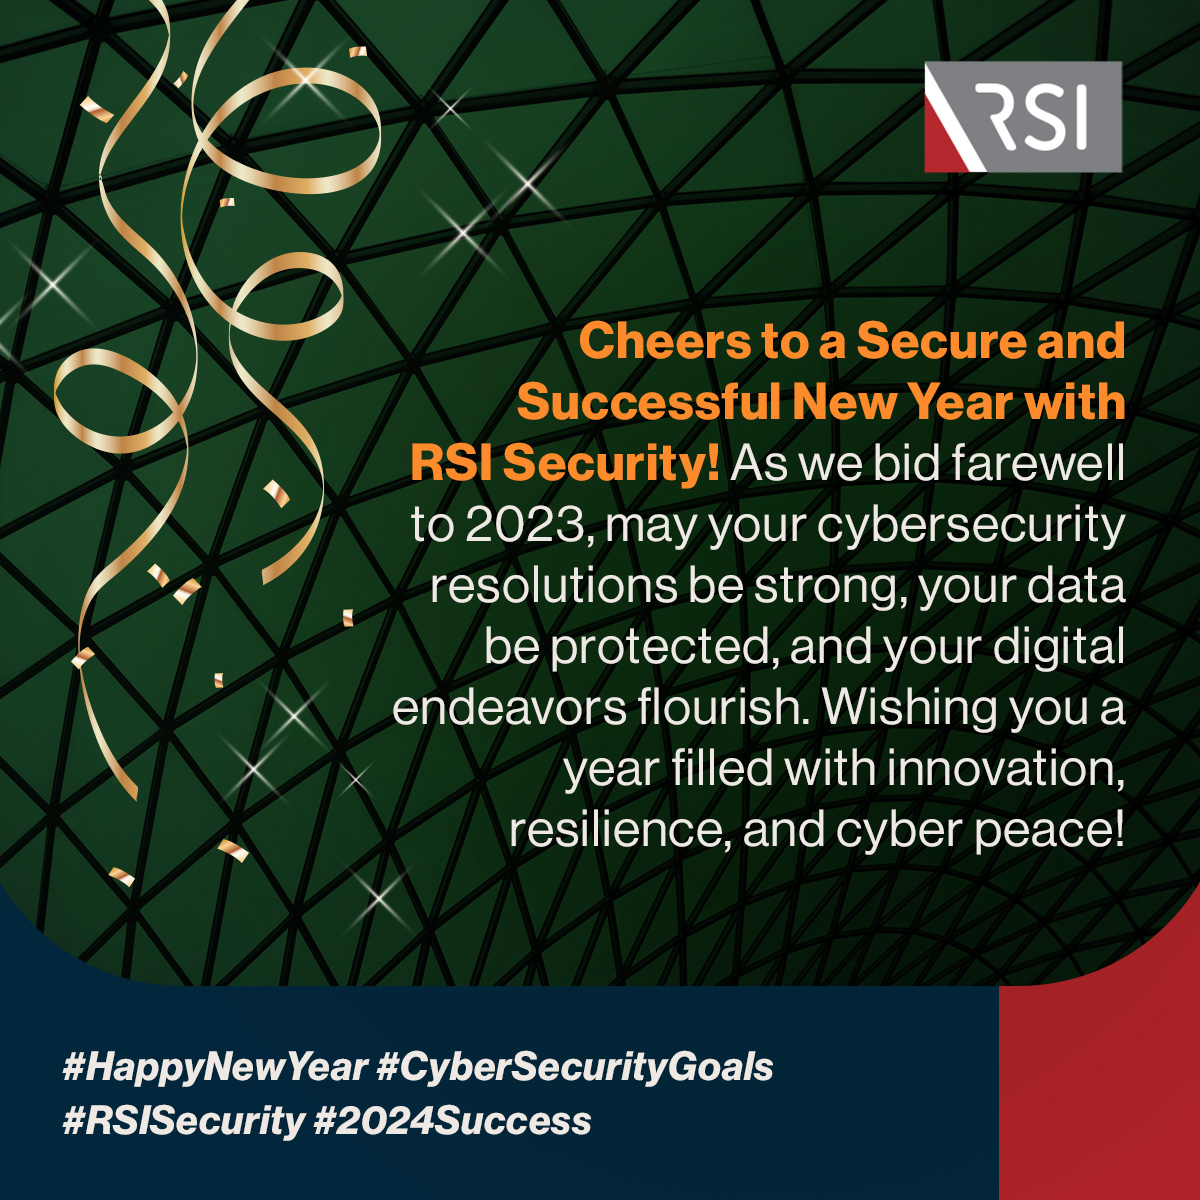 Happy New Year from the cyber warriors at RSI Security! Wishing you a secure 2024! #HappyNewYear #CyberSecurityGoals #RSISecurity #2024Success